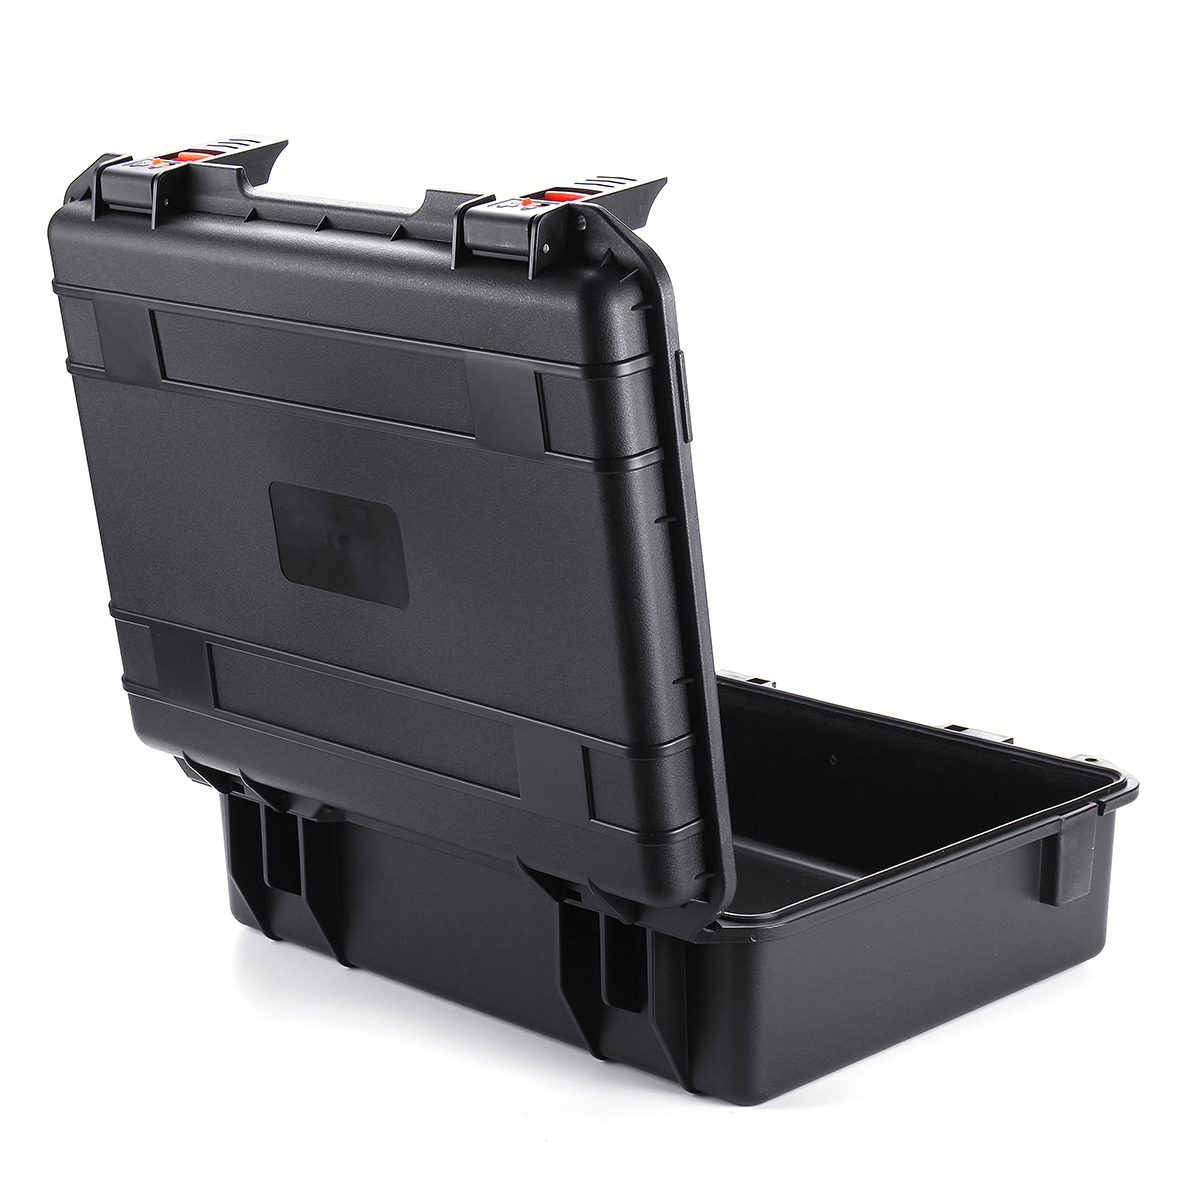 Waterproof-Hard-Carry-Case-Tool-Kits-Impact-Resistant-Shockproof-Storage-Box-Safety-Hardware-toolbox-1665199-3